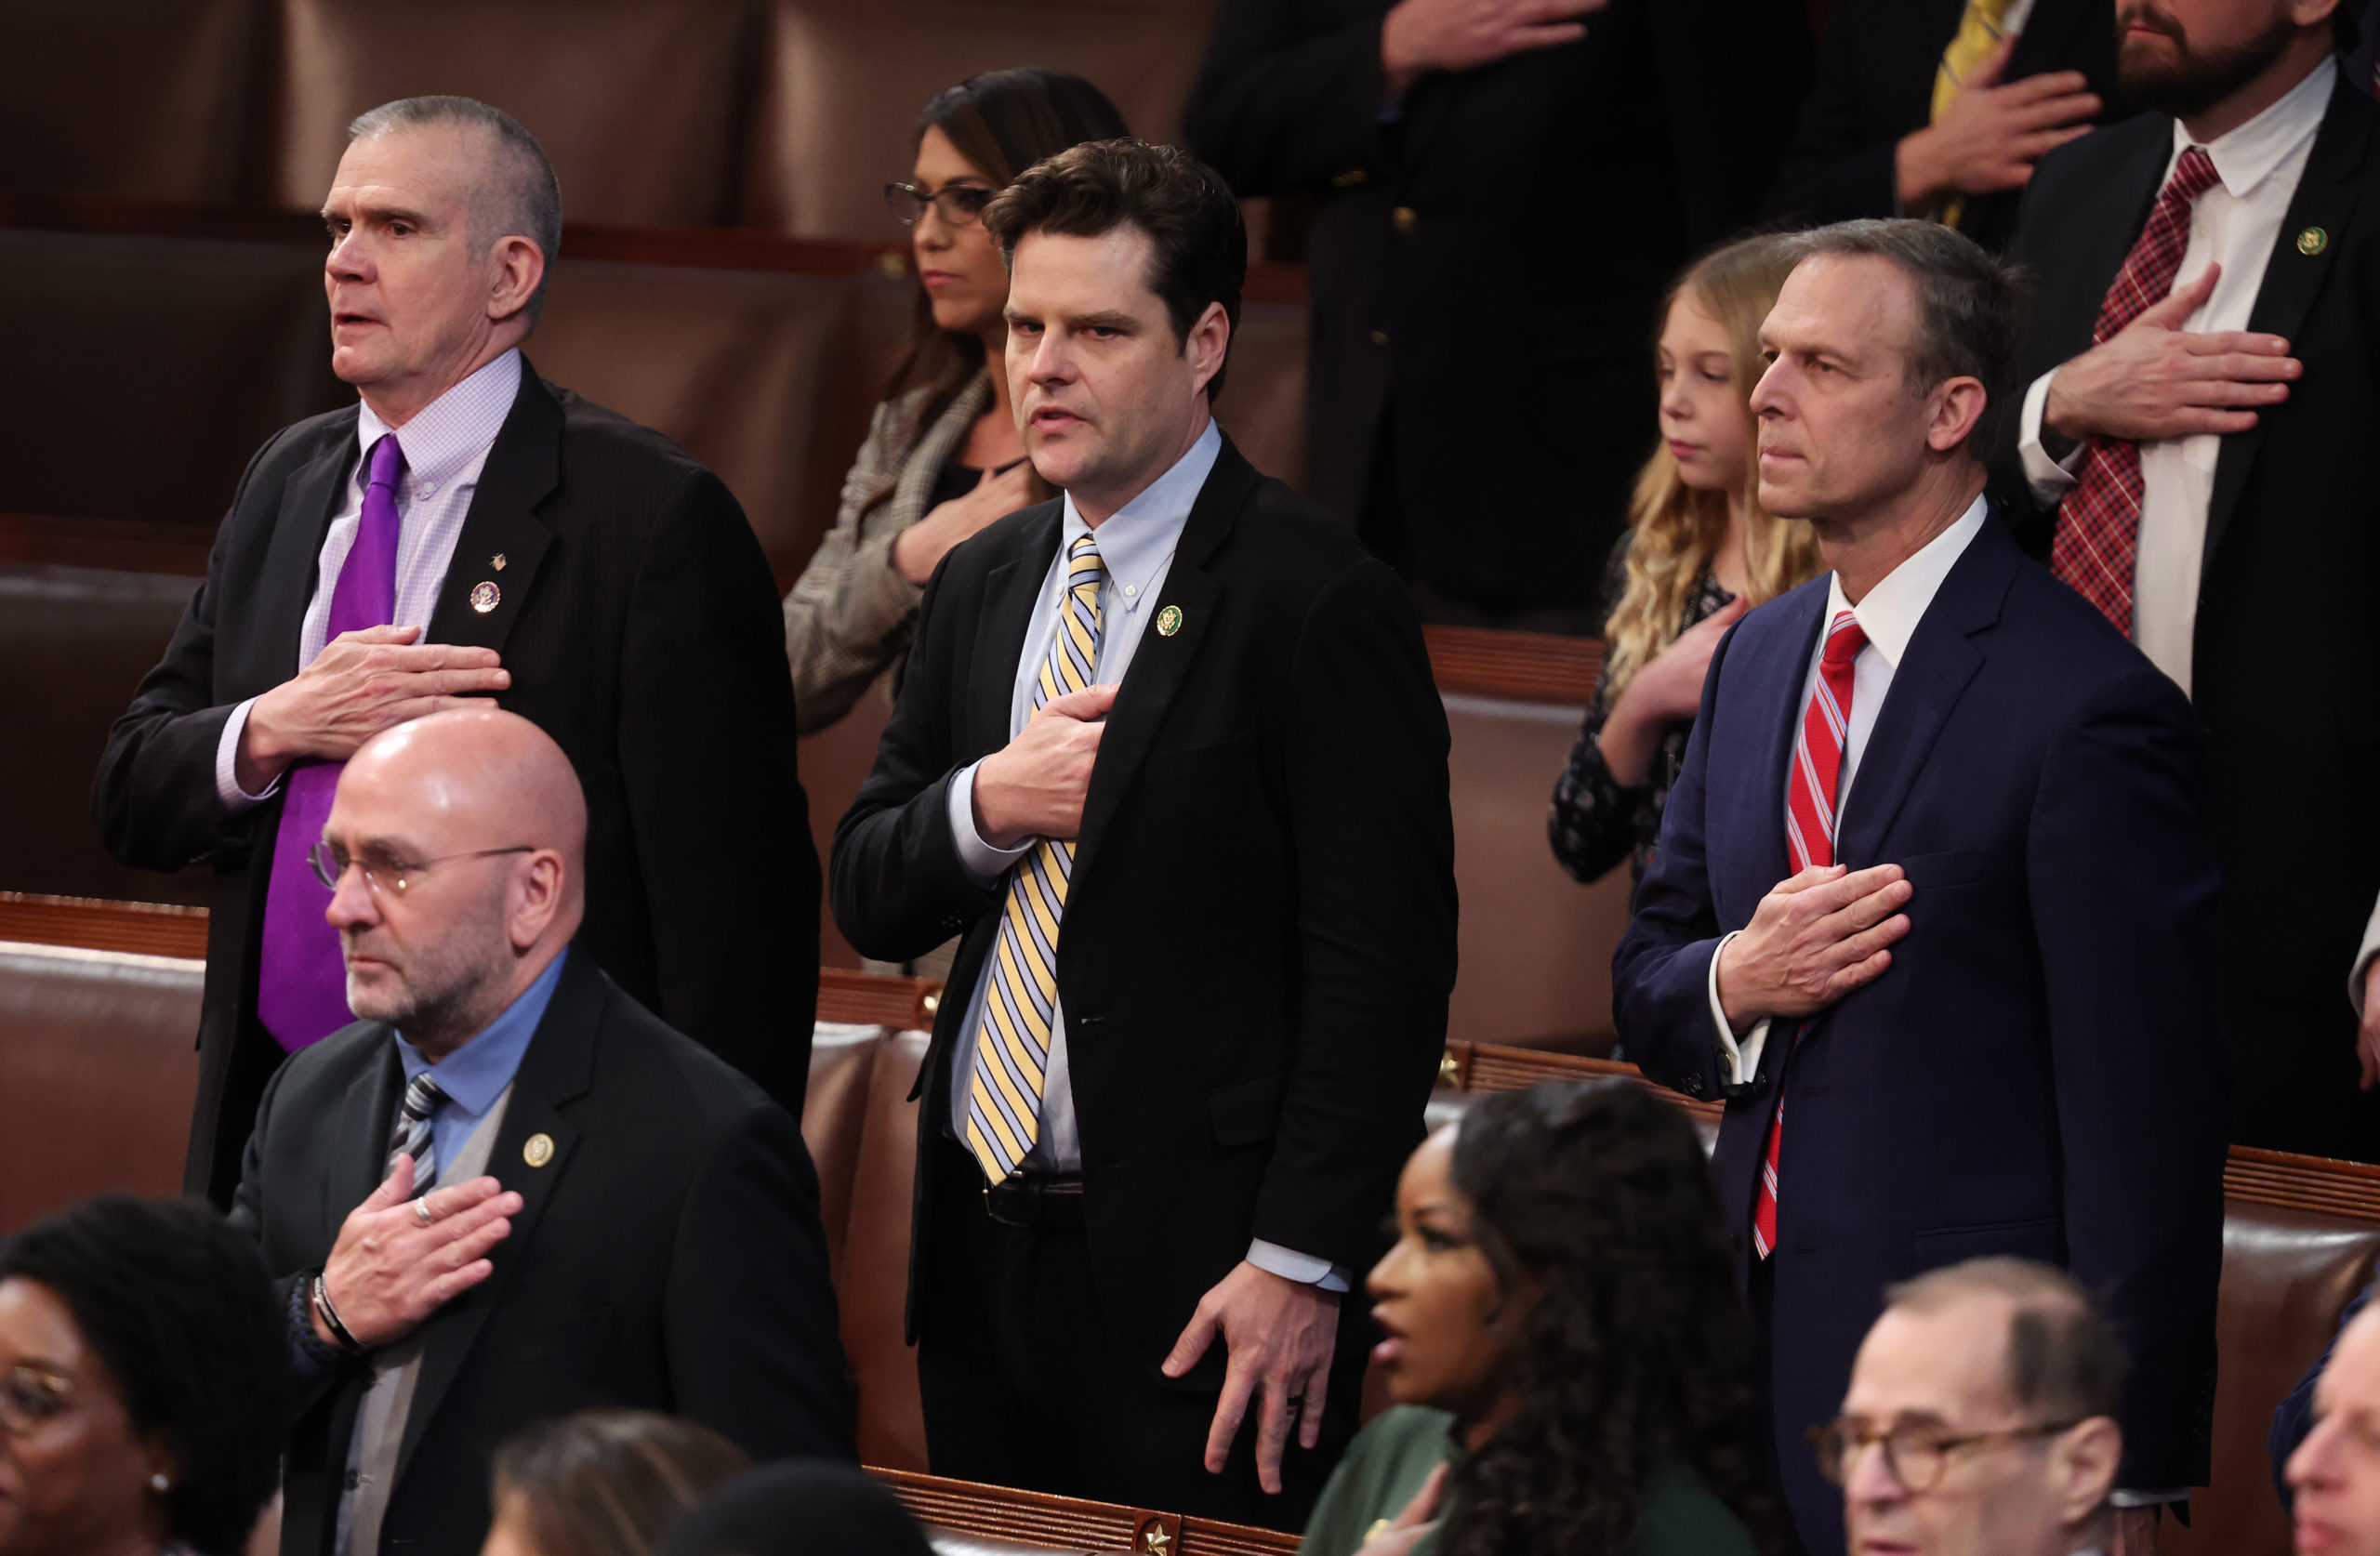 WASHINGTON, DC - JANUARY 05: (L-R) U.S. Rep.-elect Matt Rosendale (R-MT), Rep.-elect Matt Gaetz (R-FL), Rep.-elect Scott Perry (R-PA) recite the Pledge of Allegiance in the House Chamber during the third day of elections for Speaker of the House at the U.S. Capitol Building on January 05, 2023 in Washington, DC. The House of Representatives is meeting to vote for the next Speaker after House Republican Leader Kevin McCarthy (R-CA) failed to earn more than 218 votes on several ballots, the first time in 100 years that the Speaker was not elected on the first ballot. (Photo by Win McNamee/Getty Images)